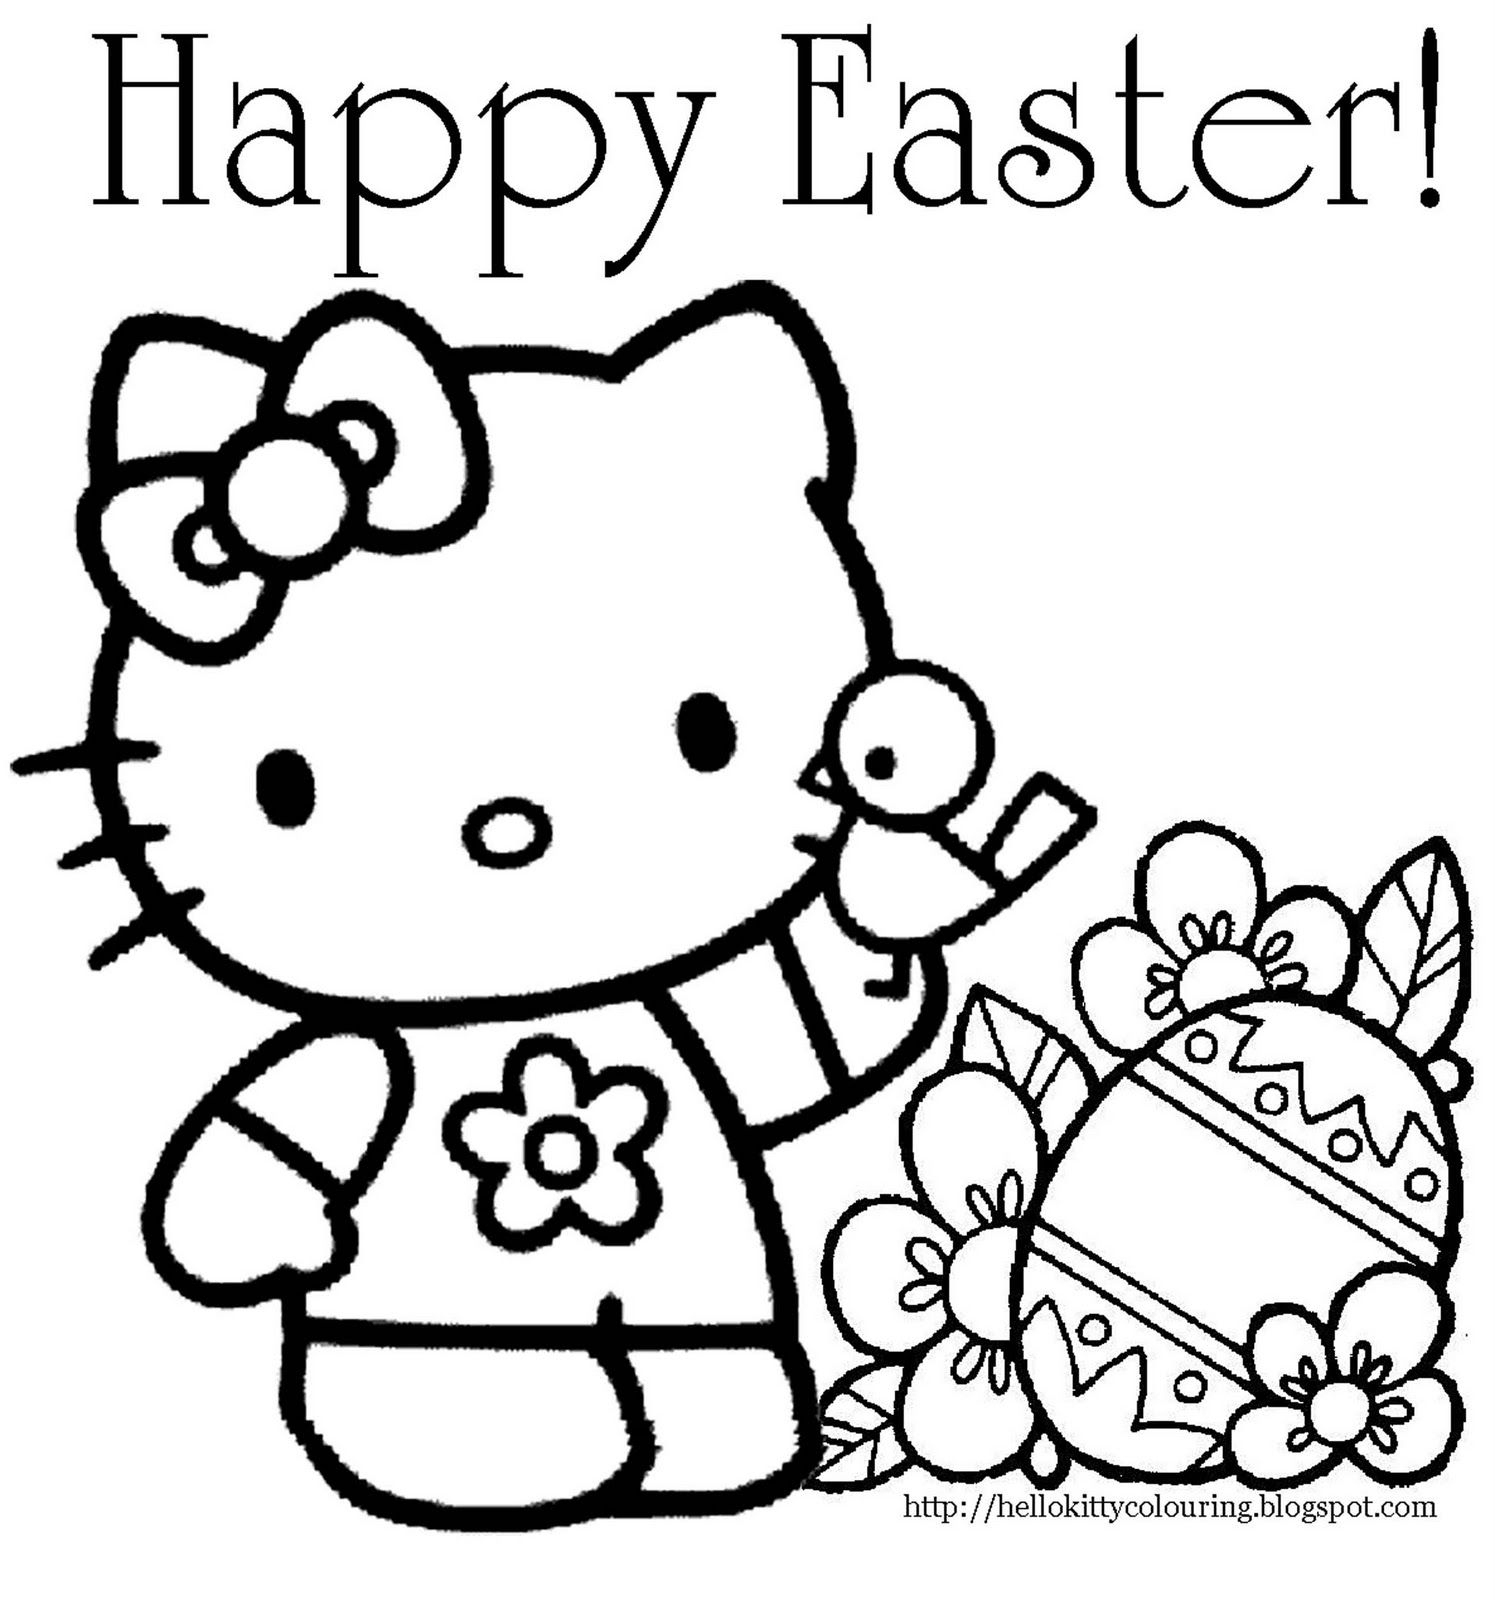 Hilla Kitte Coloriing | Hello Kitty Easter Coloring Page | Books - Free Easter Color Pages Printable